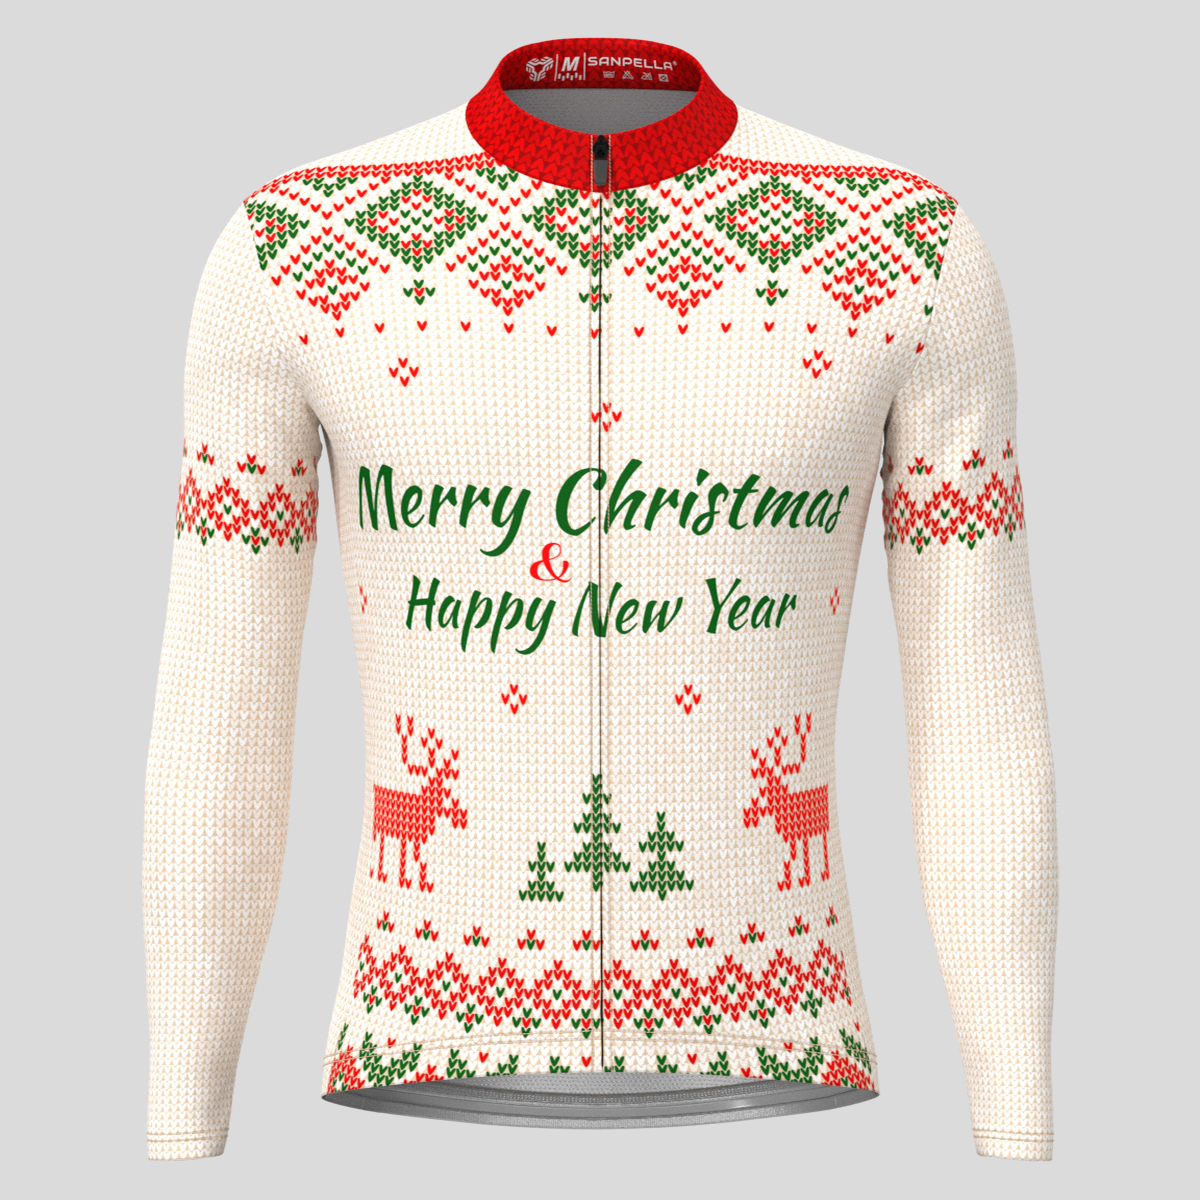 Ugly Sweater Merry Christmas Men's LS Cycling Jersey - Beige